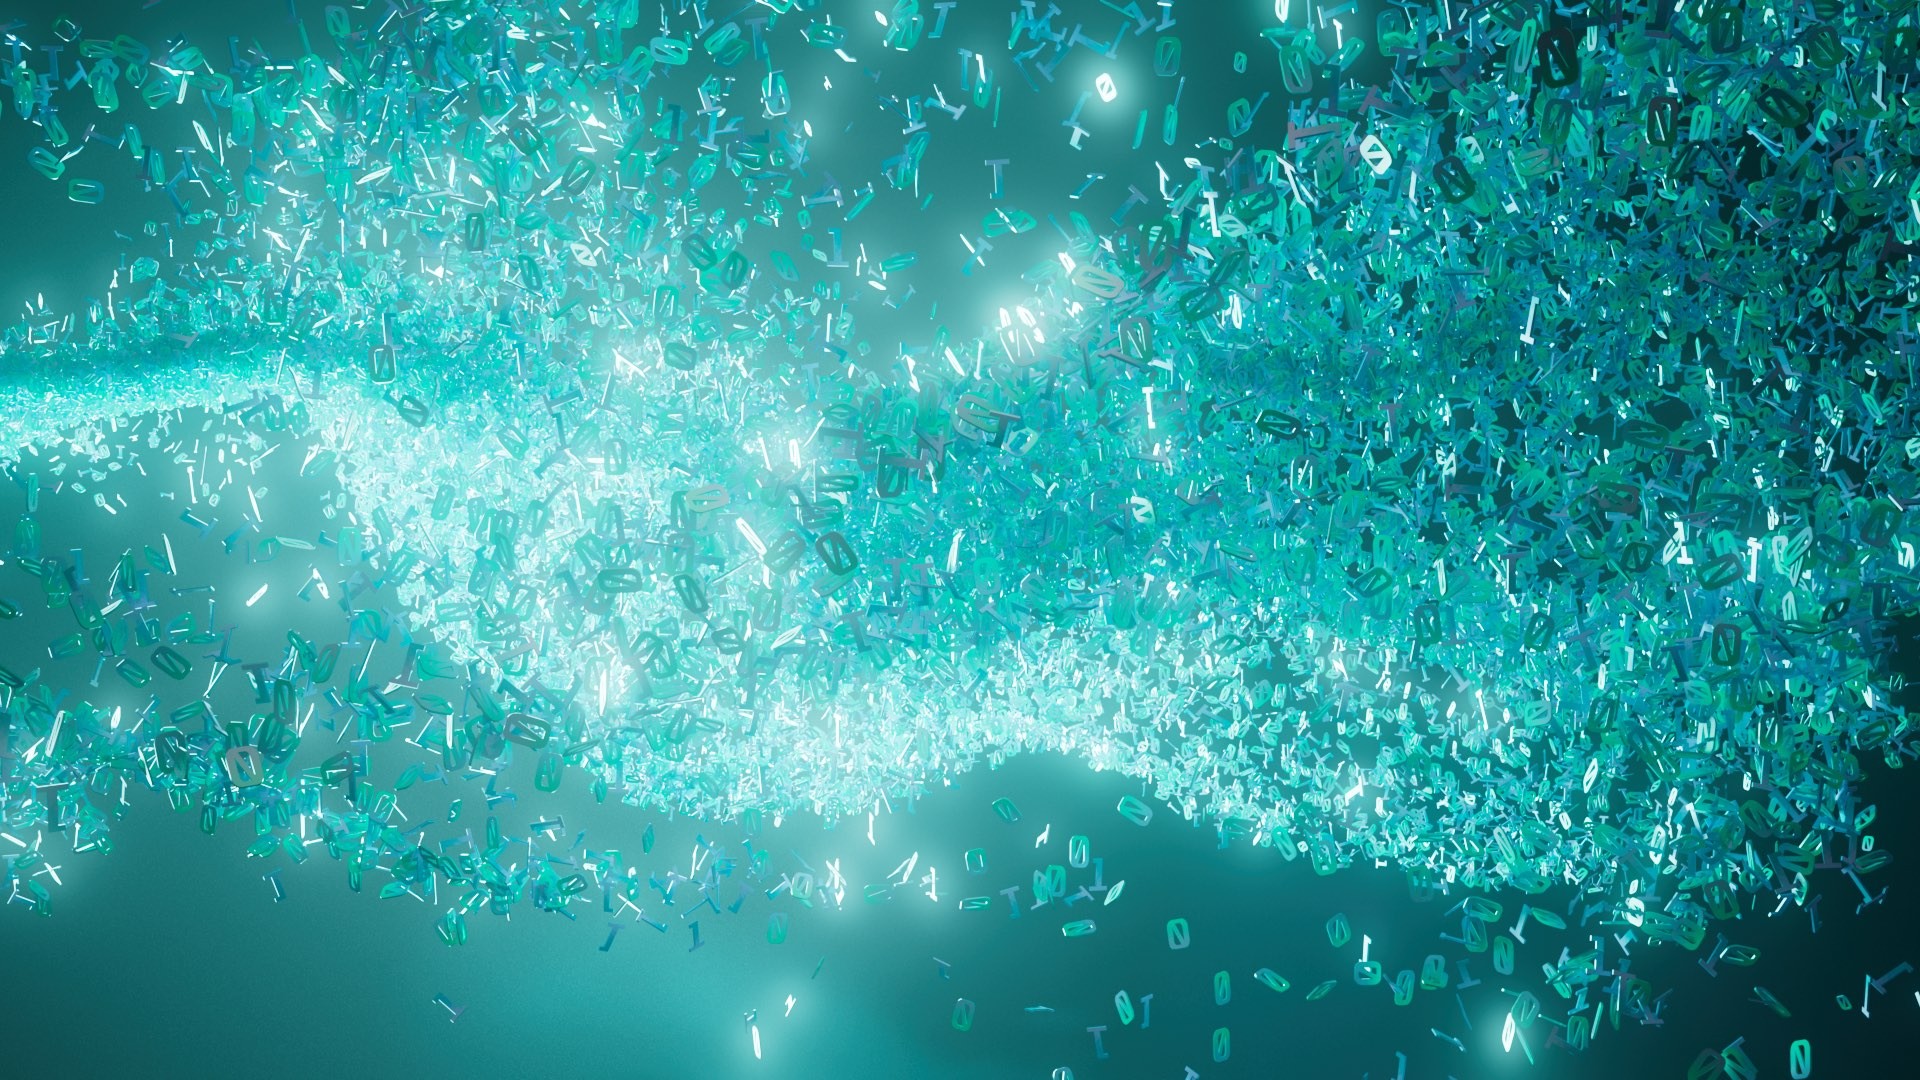 3d animation of Biological data in green and blue floating through the air.jpg